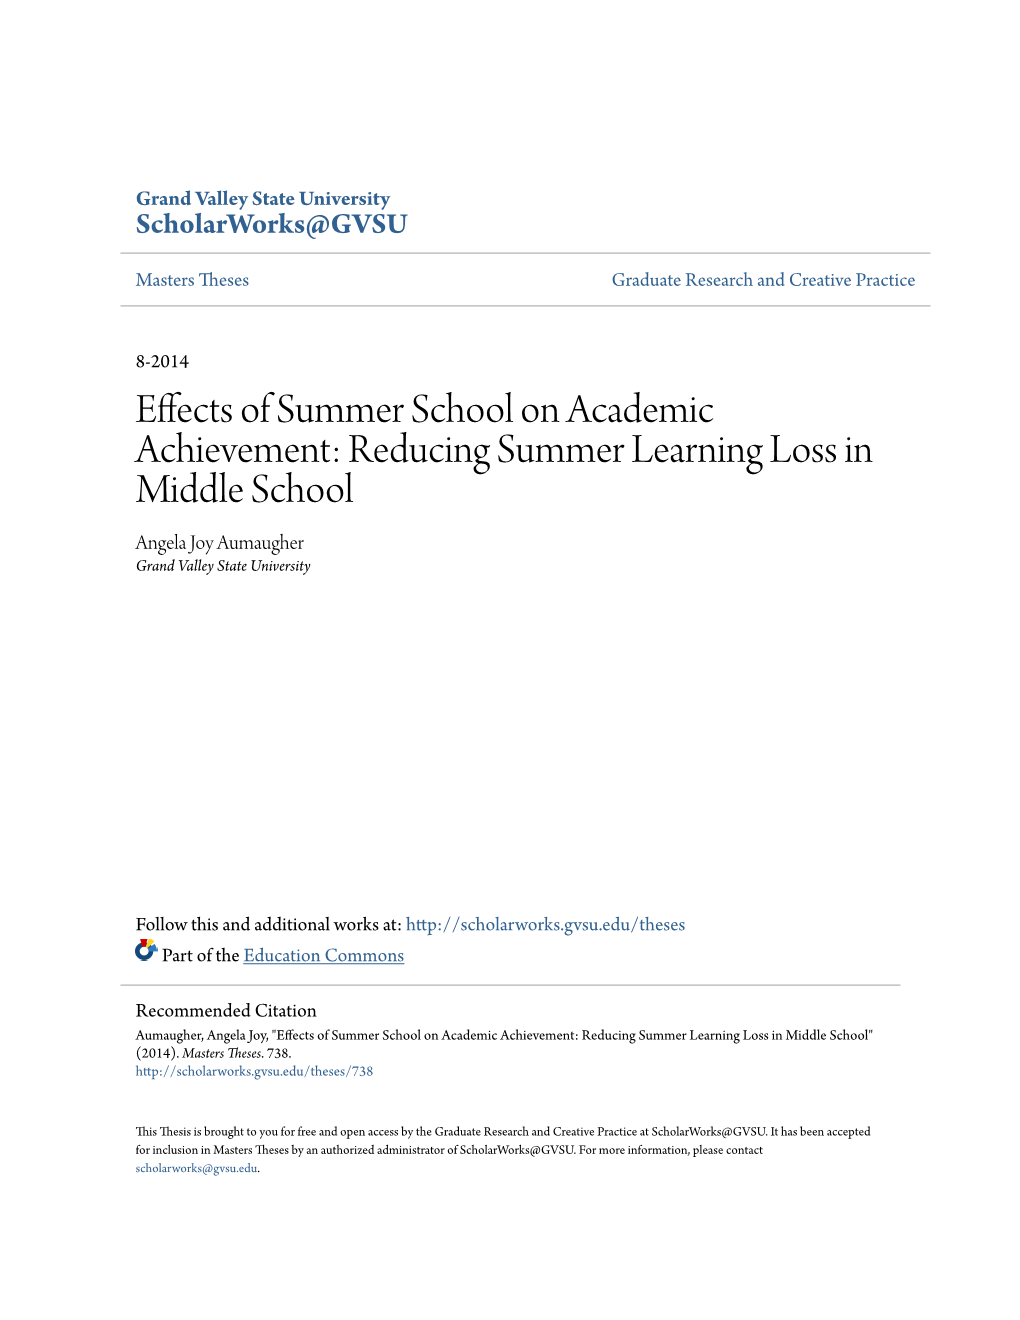 Effects of Summer School on Academic Achievement: Reducing Summer Learning Loss in Middle School Angela Joy Aumaugher Grand Valley State University